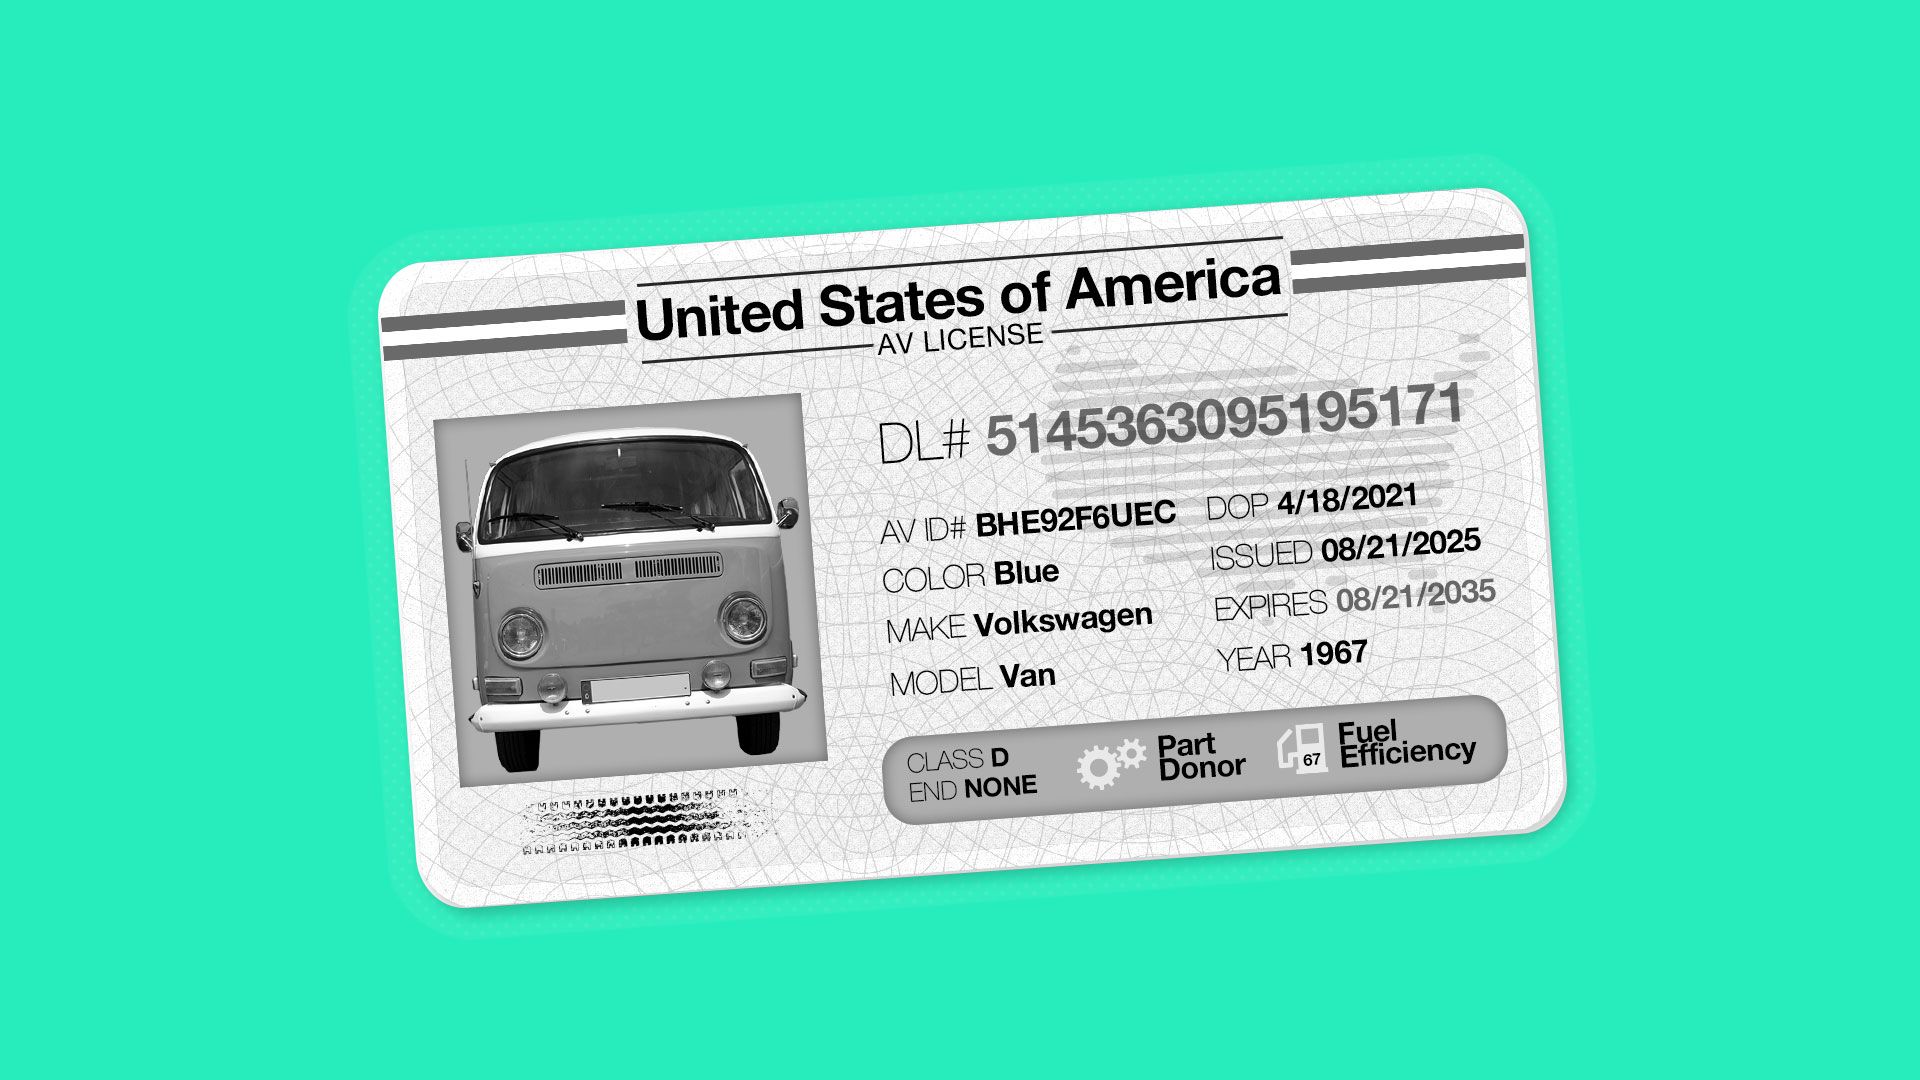 imagined mock-up of a driver's license for a self-driving car